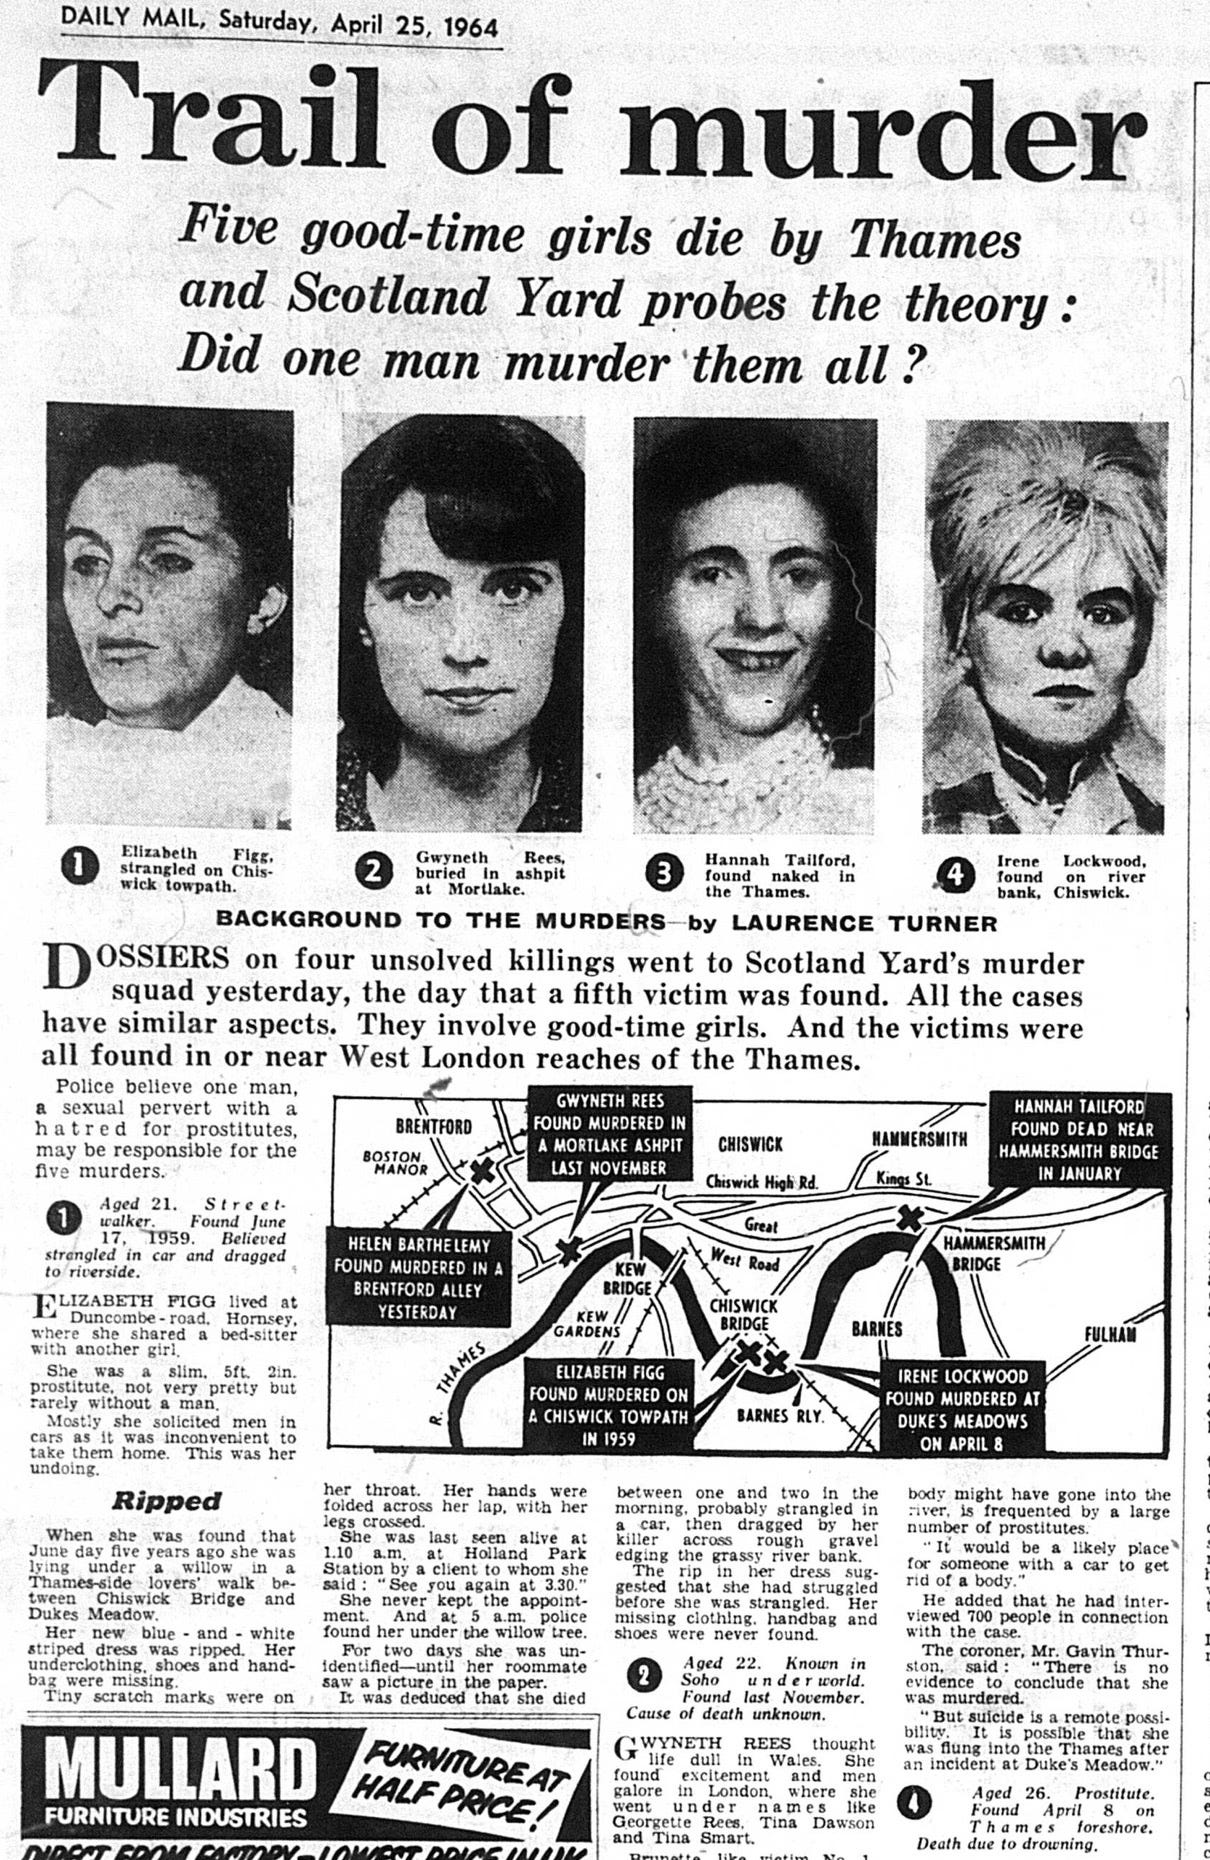 Daily Mail on Nude Murders 1964